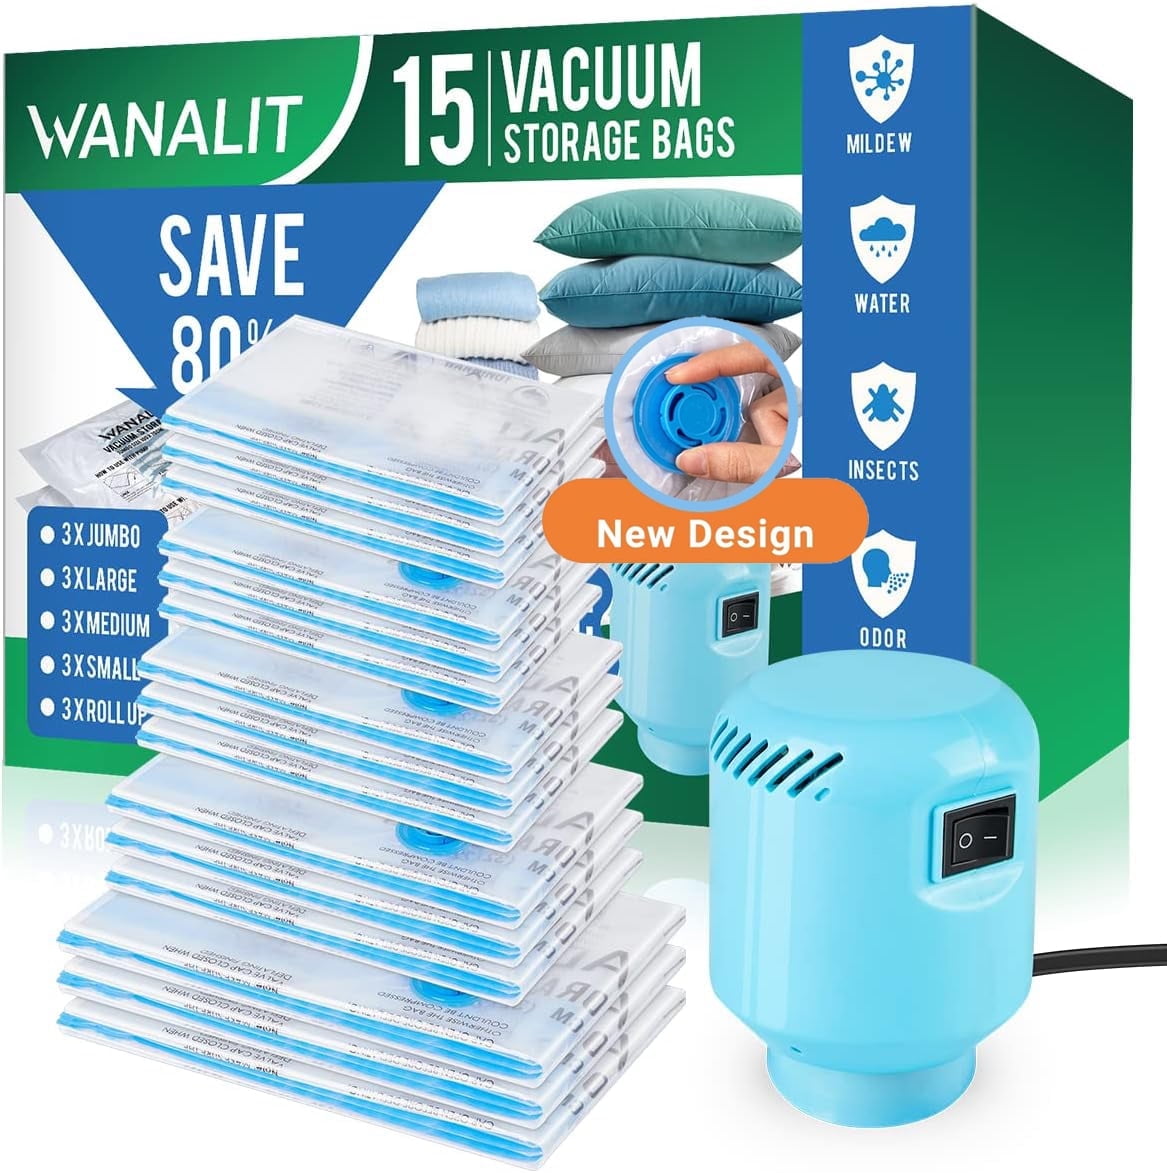 WANALIT Vacuum Storage Bags (Variety 28 Pack), Space Bags Vacuum Storage  Bags, Zipper Vacuum Sealed Bags for Clothing, Clothes, Comforters and